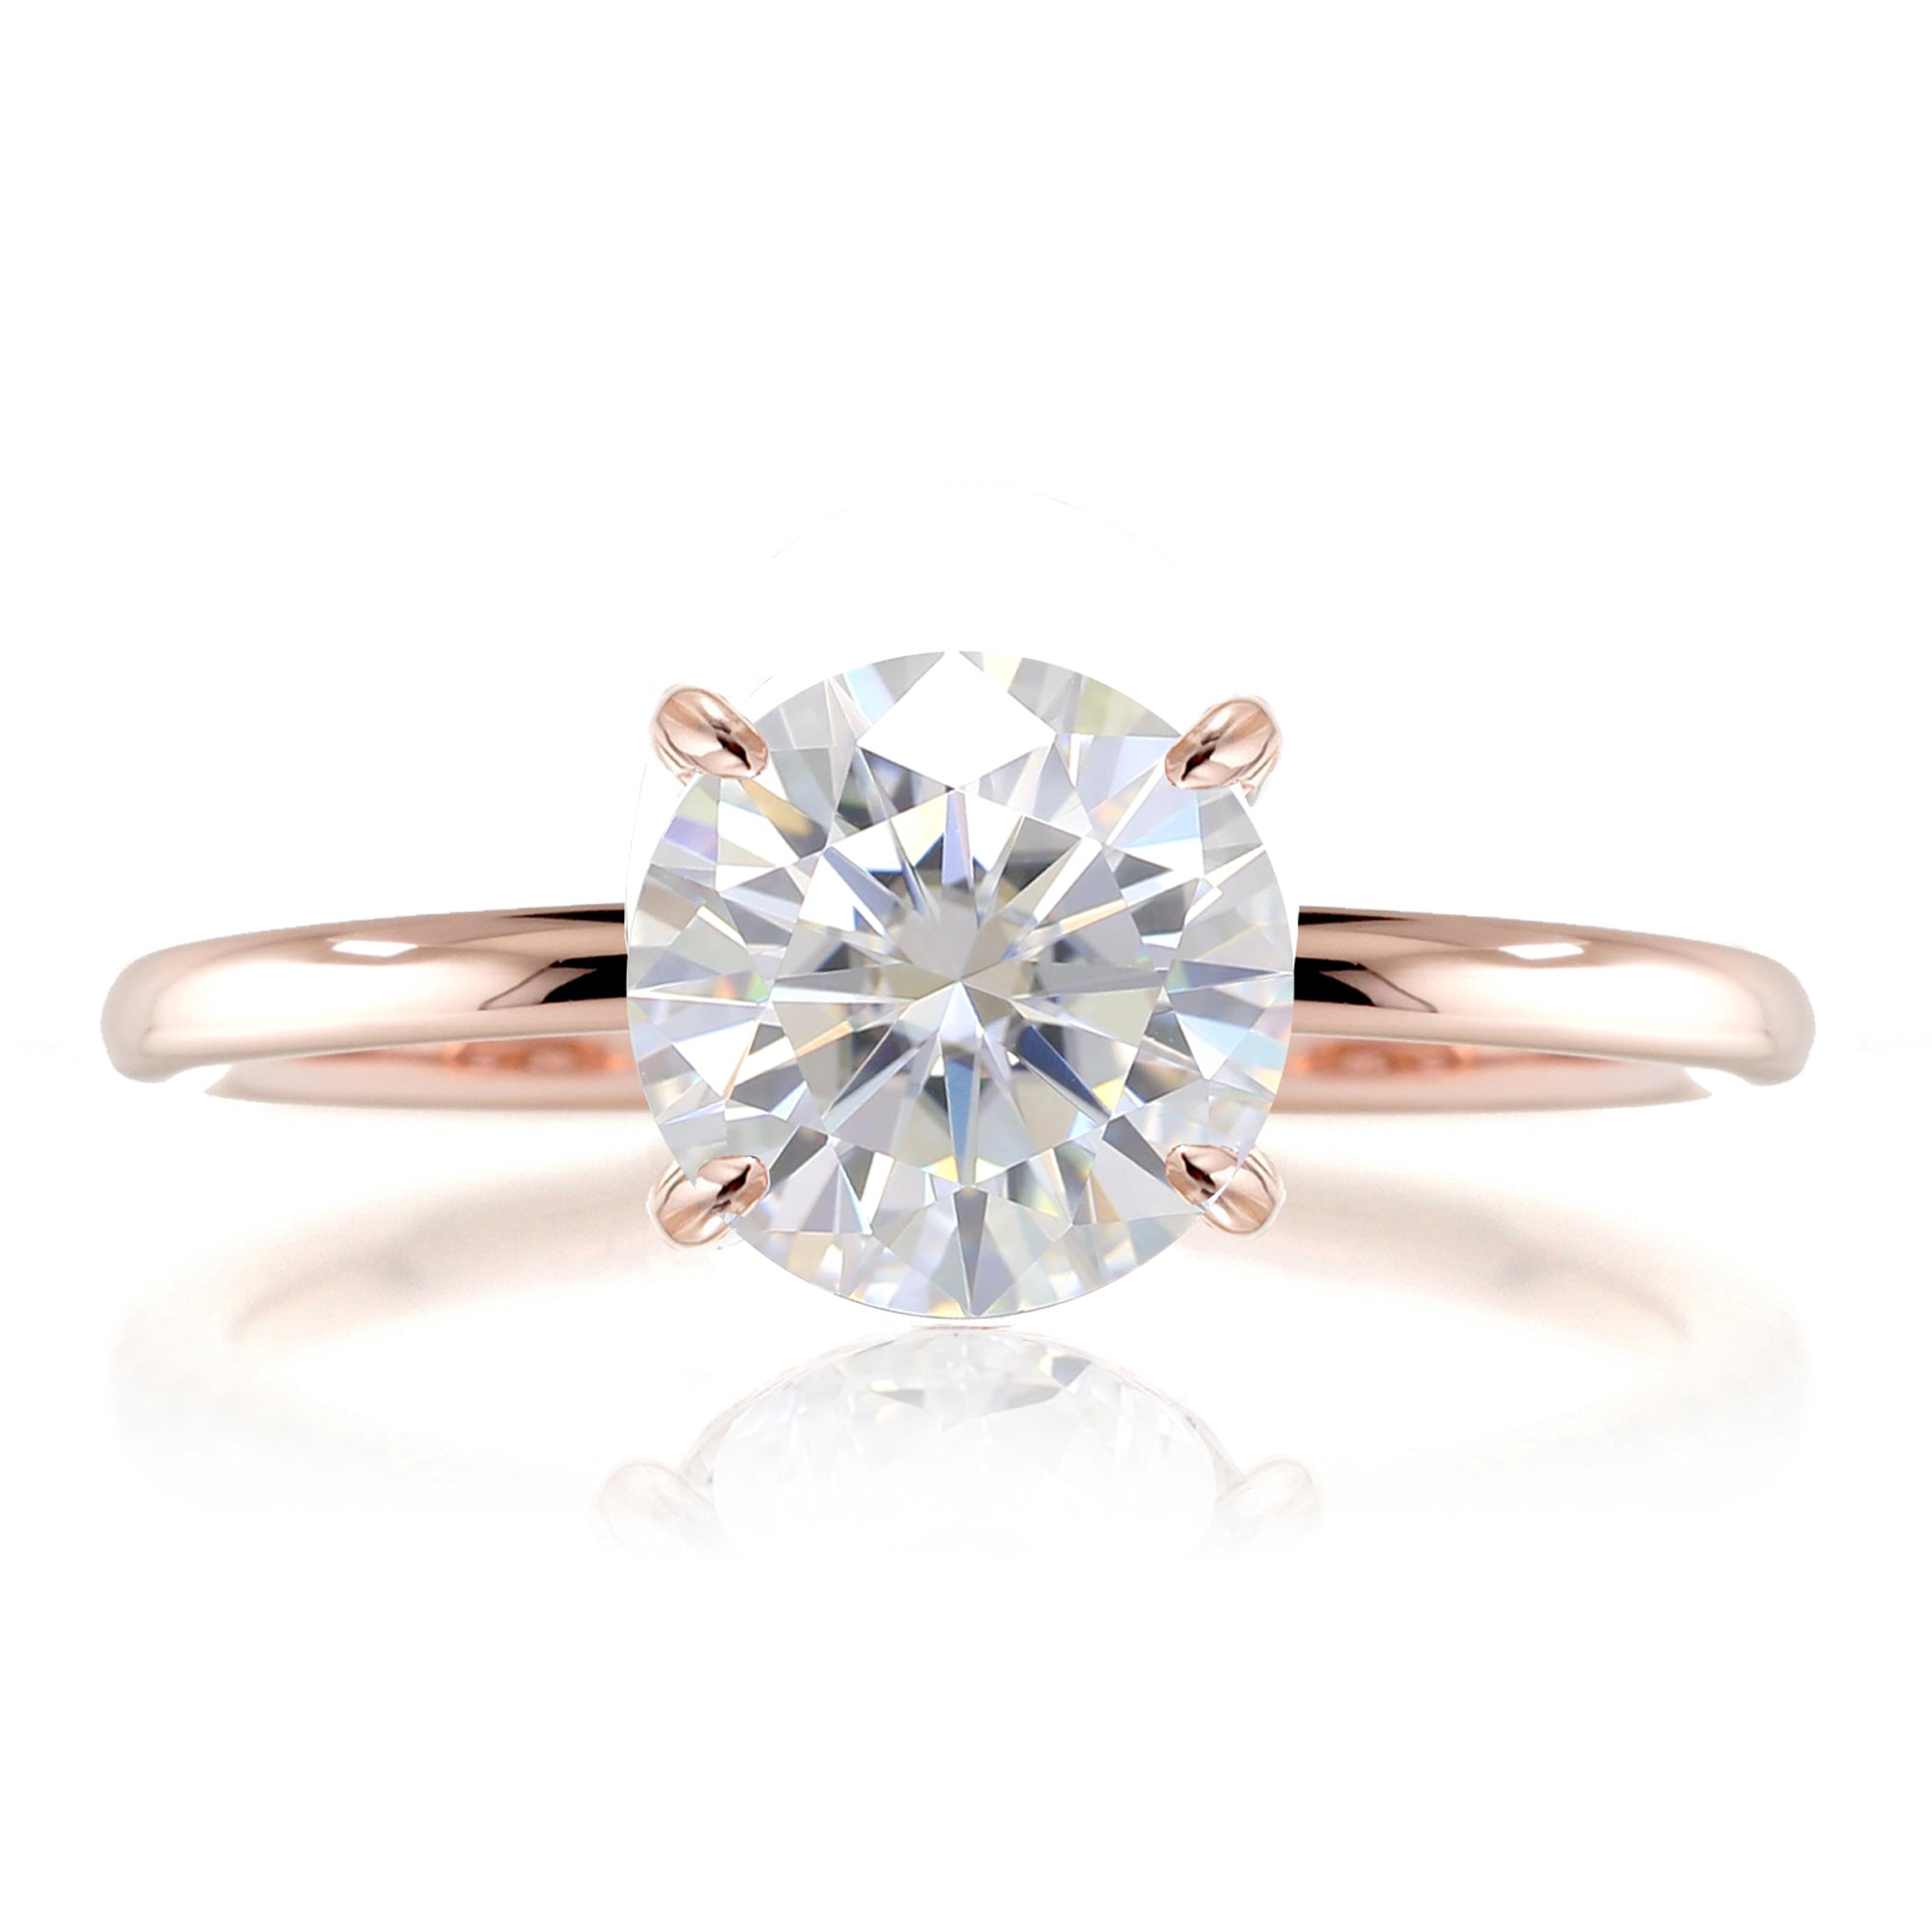 Round brilliant cut moissanite solid band engagement ring rose gold - The Ava